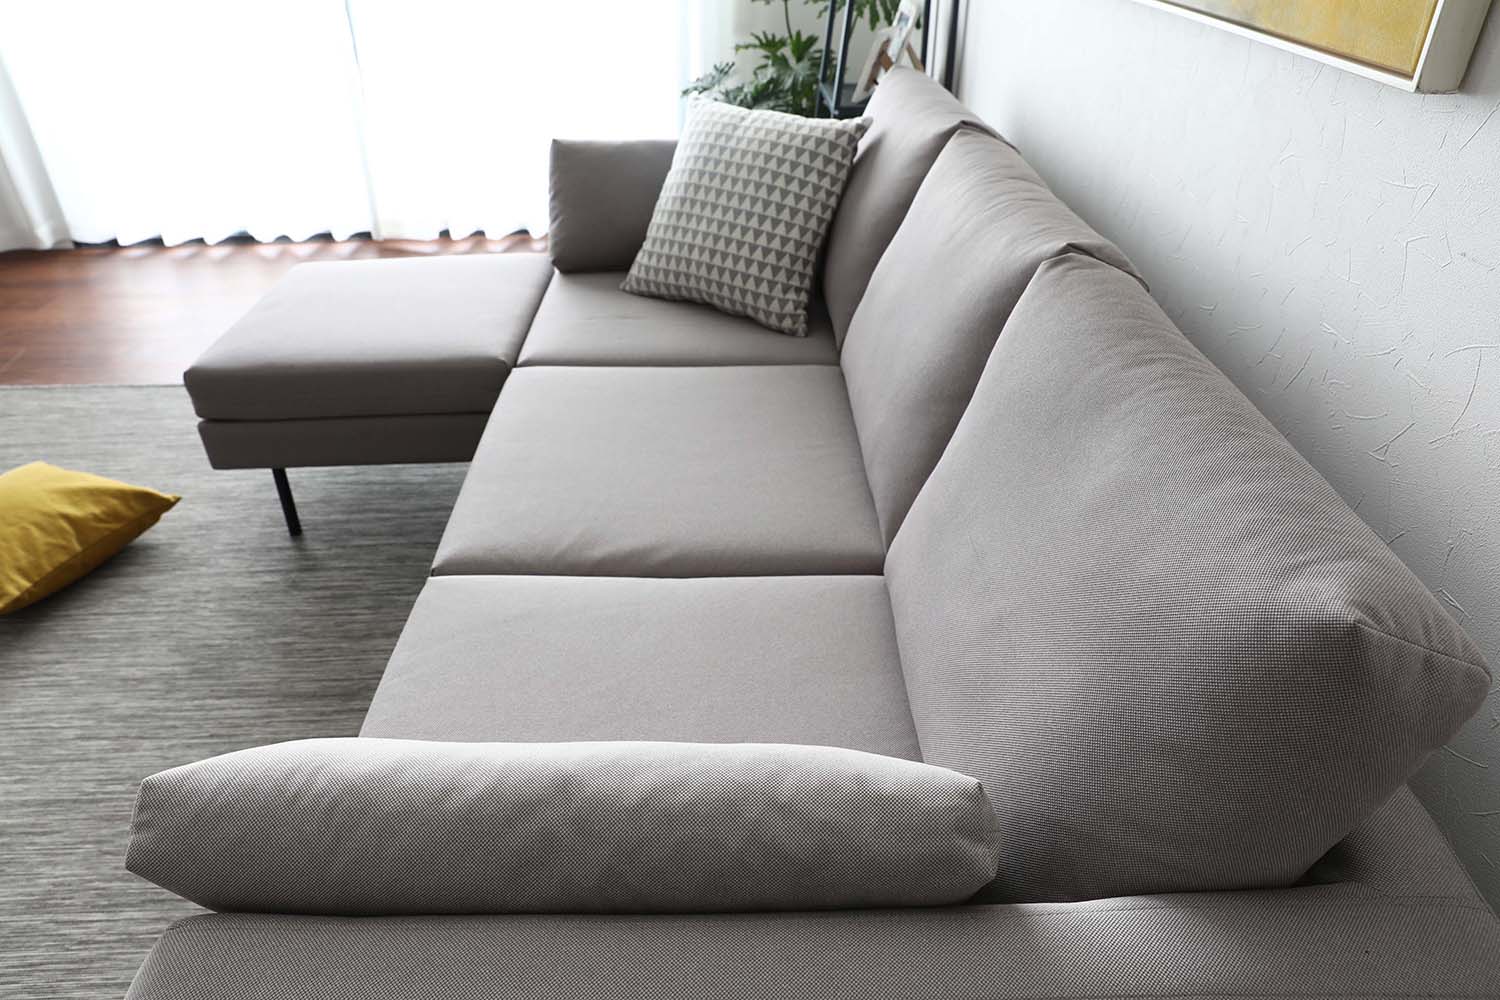 Side view of the Luna Sofa 3 seater sofa showcasing its ability to comfortably accommodate 3 seaters.